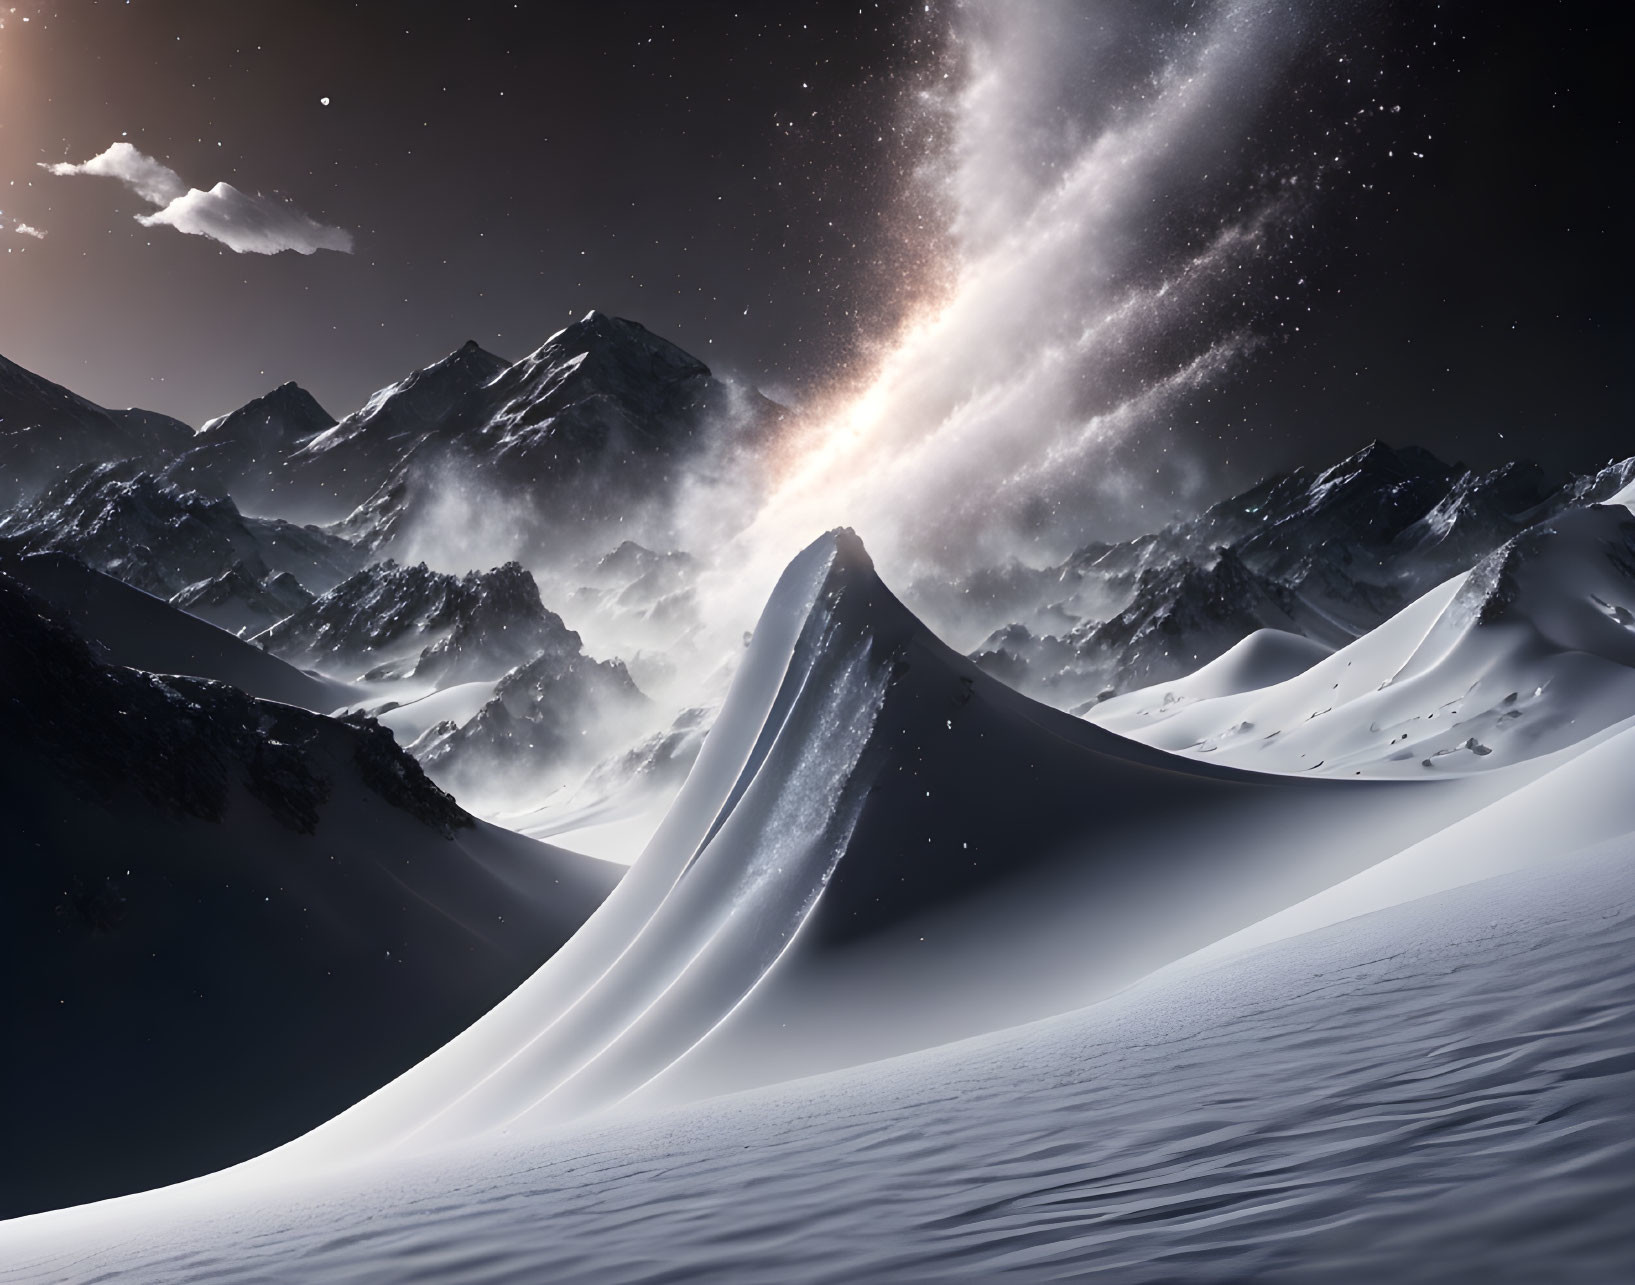 Snowy Mountain Peaks Under Starry Sky with Cosmic Event